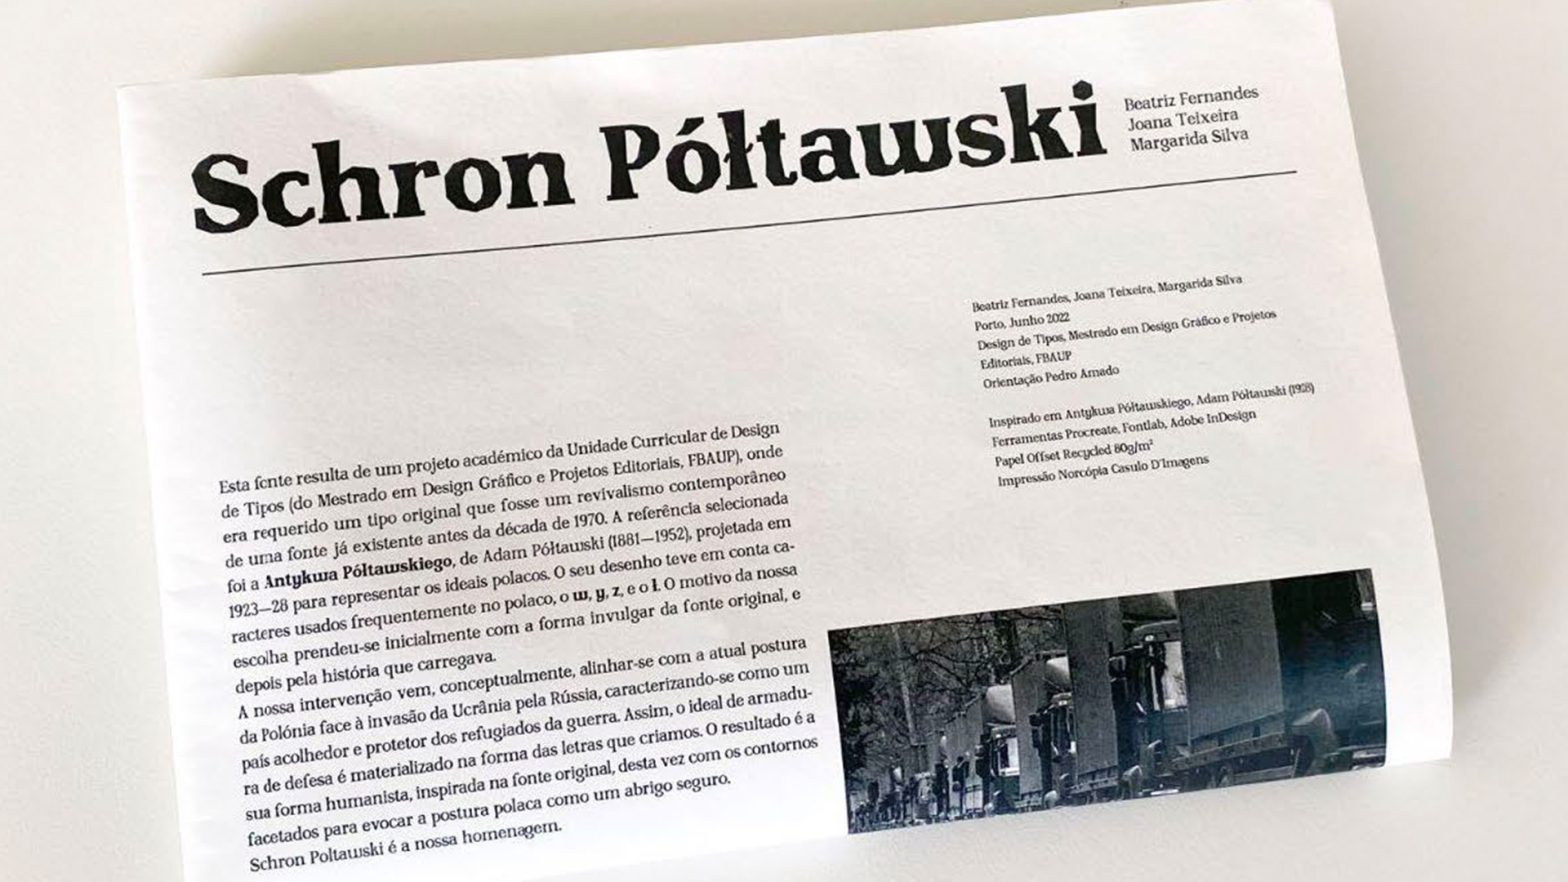 Schron Poltawski is typeface revival designed by Beatriz Fernandes, Joana Teixeira and Margarida Silva, for the Type Design course in 2022.